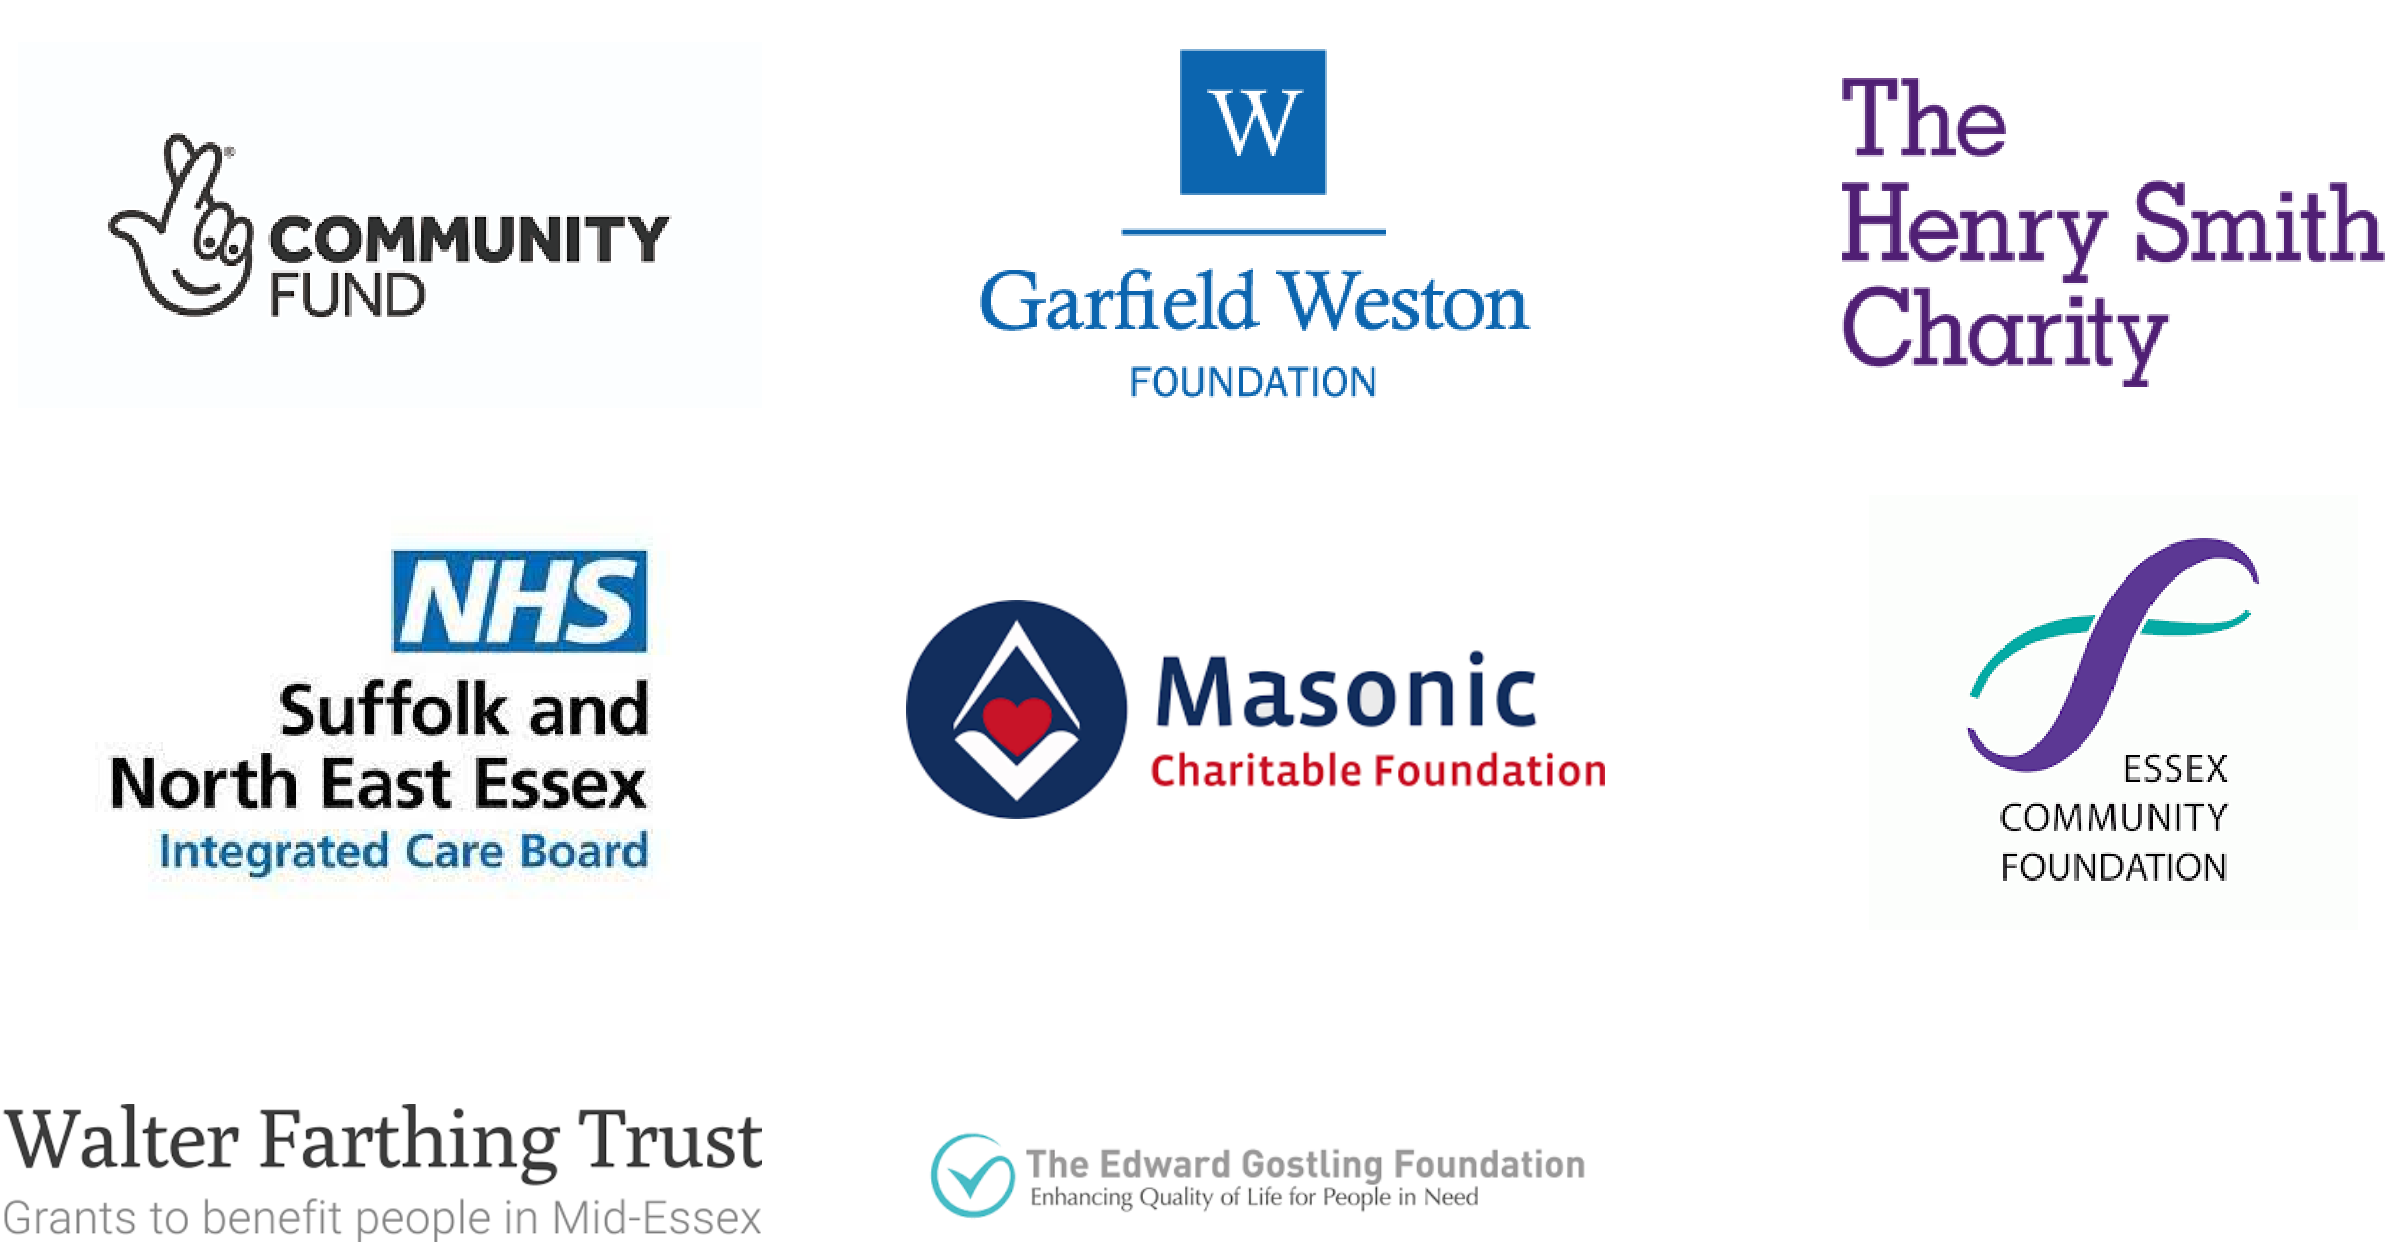 The National Lottery Community Fund Garfield Weston The Henry Smith Charity The Suffolk and North East Essex Integrated Care Board The Masonic Charitable Foundation Essex Community Foundation Walther Farthing FSA charities Edward Gostling Foundation